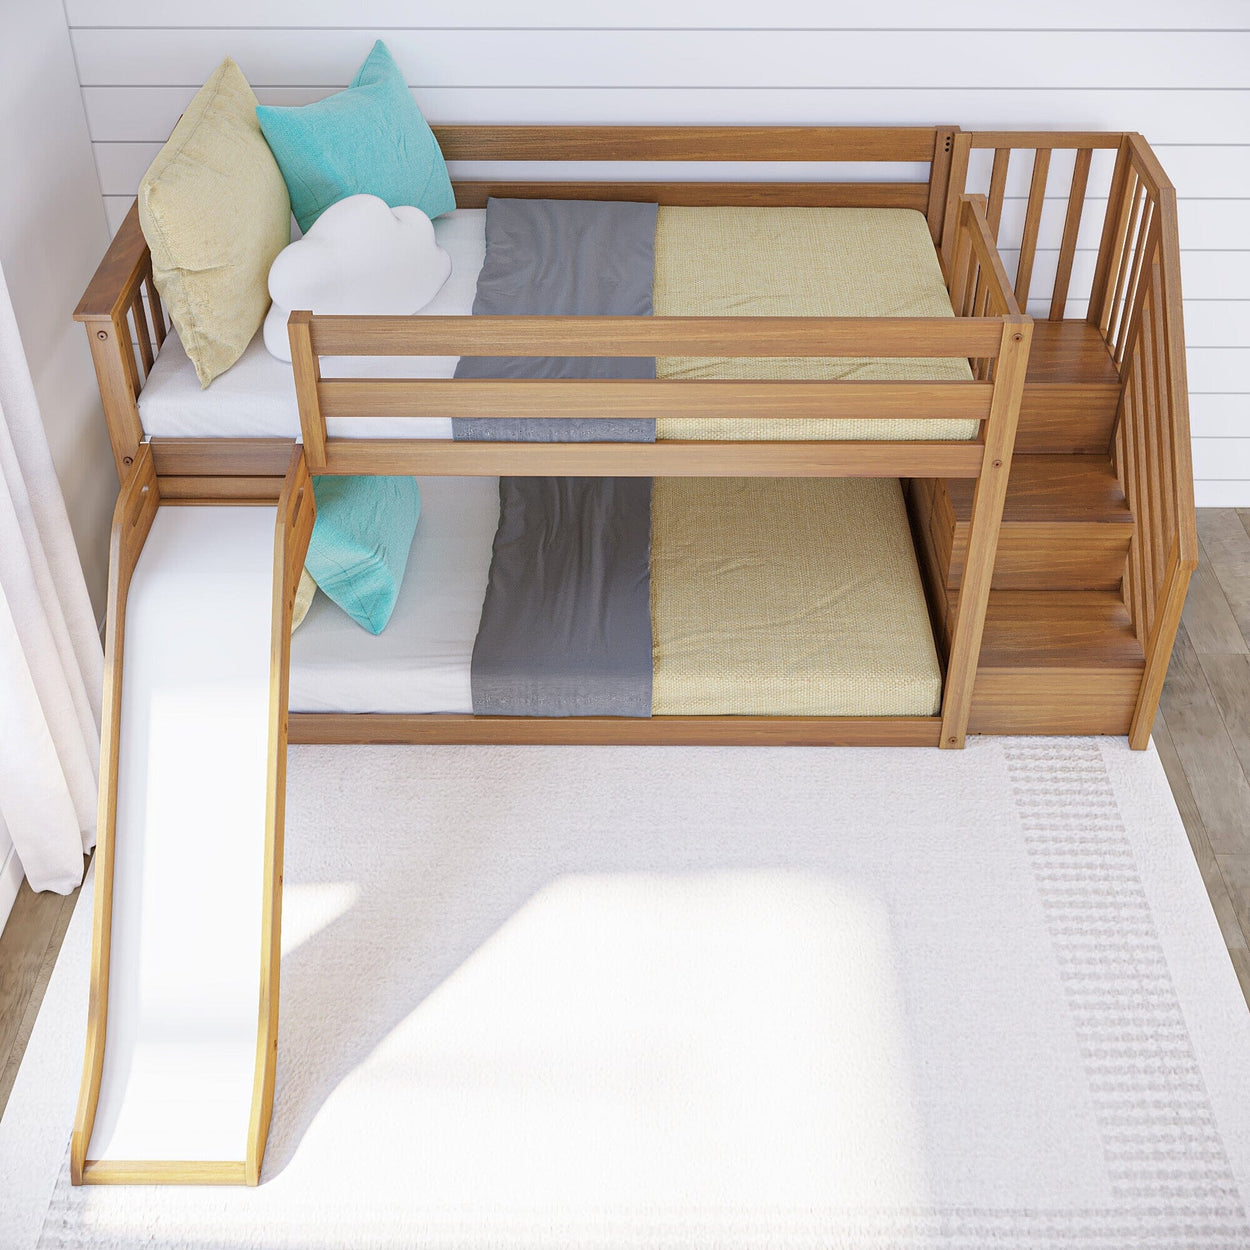 185421-007 : Bunk Beds Classic Low Bunk with Stairs and Easy Slide, Pecan